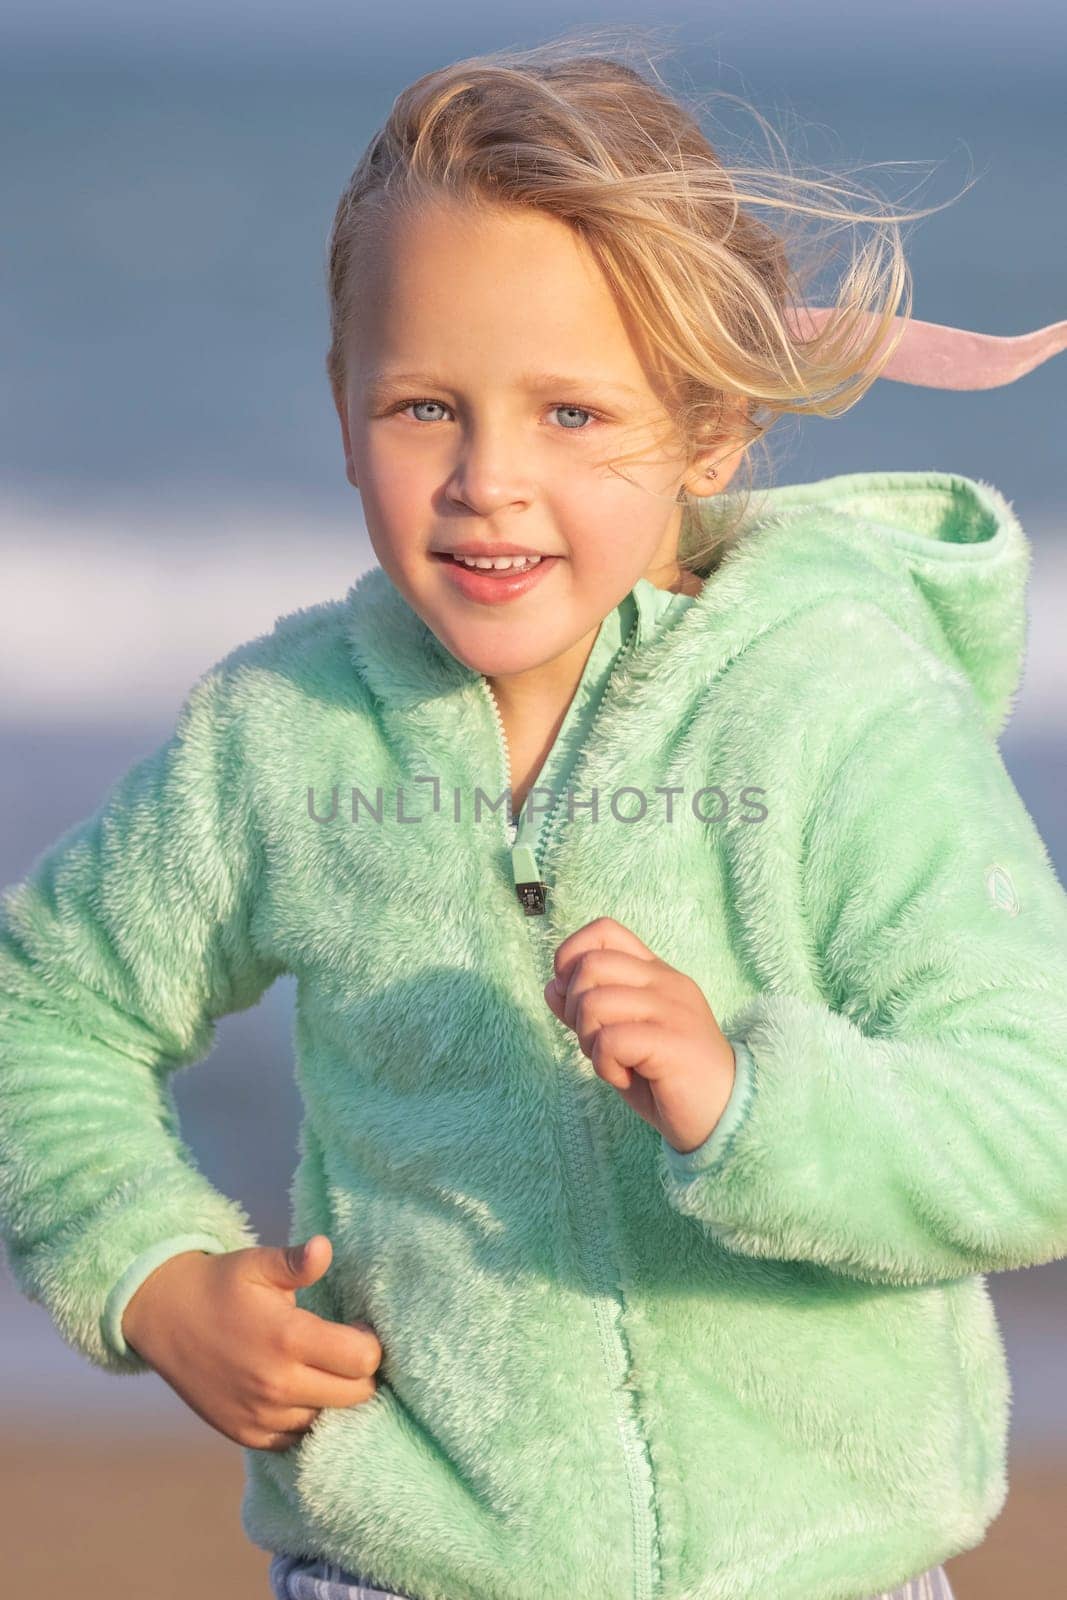 A 5-year-old girl in a green jacket is running by gcm